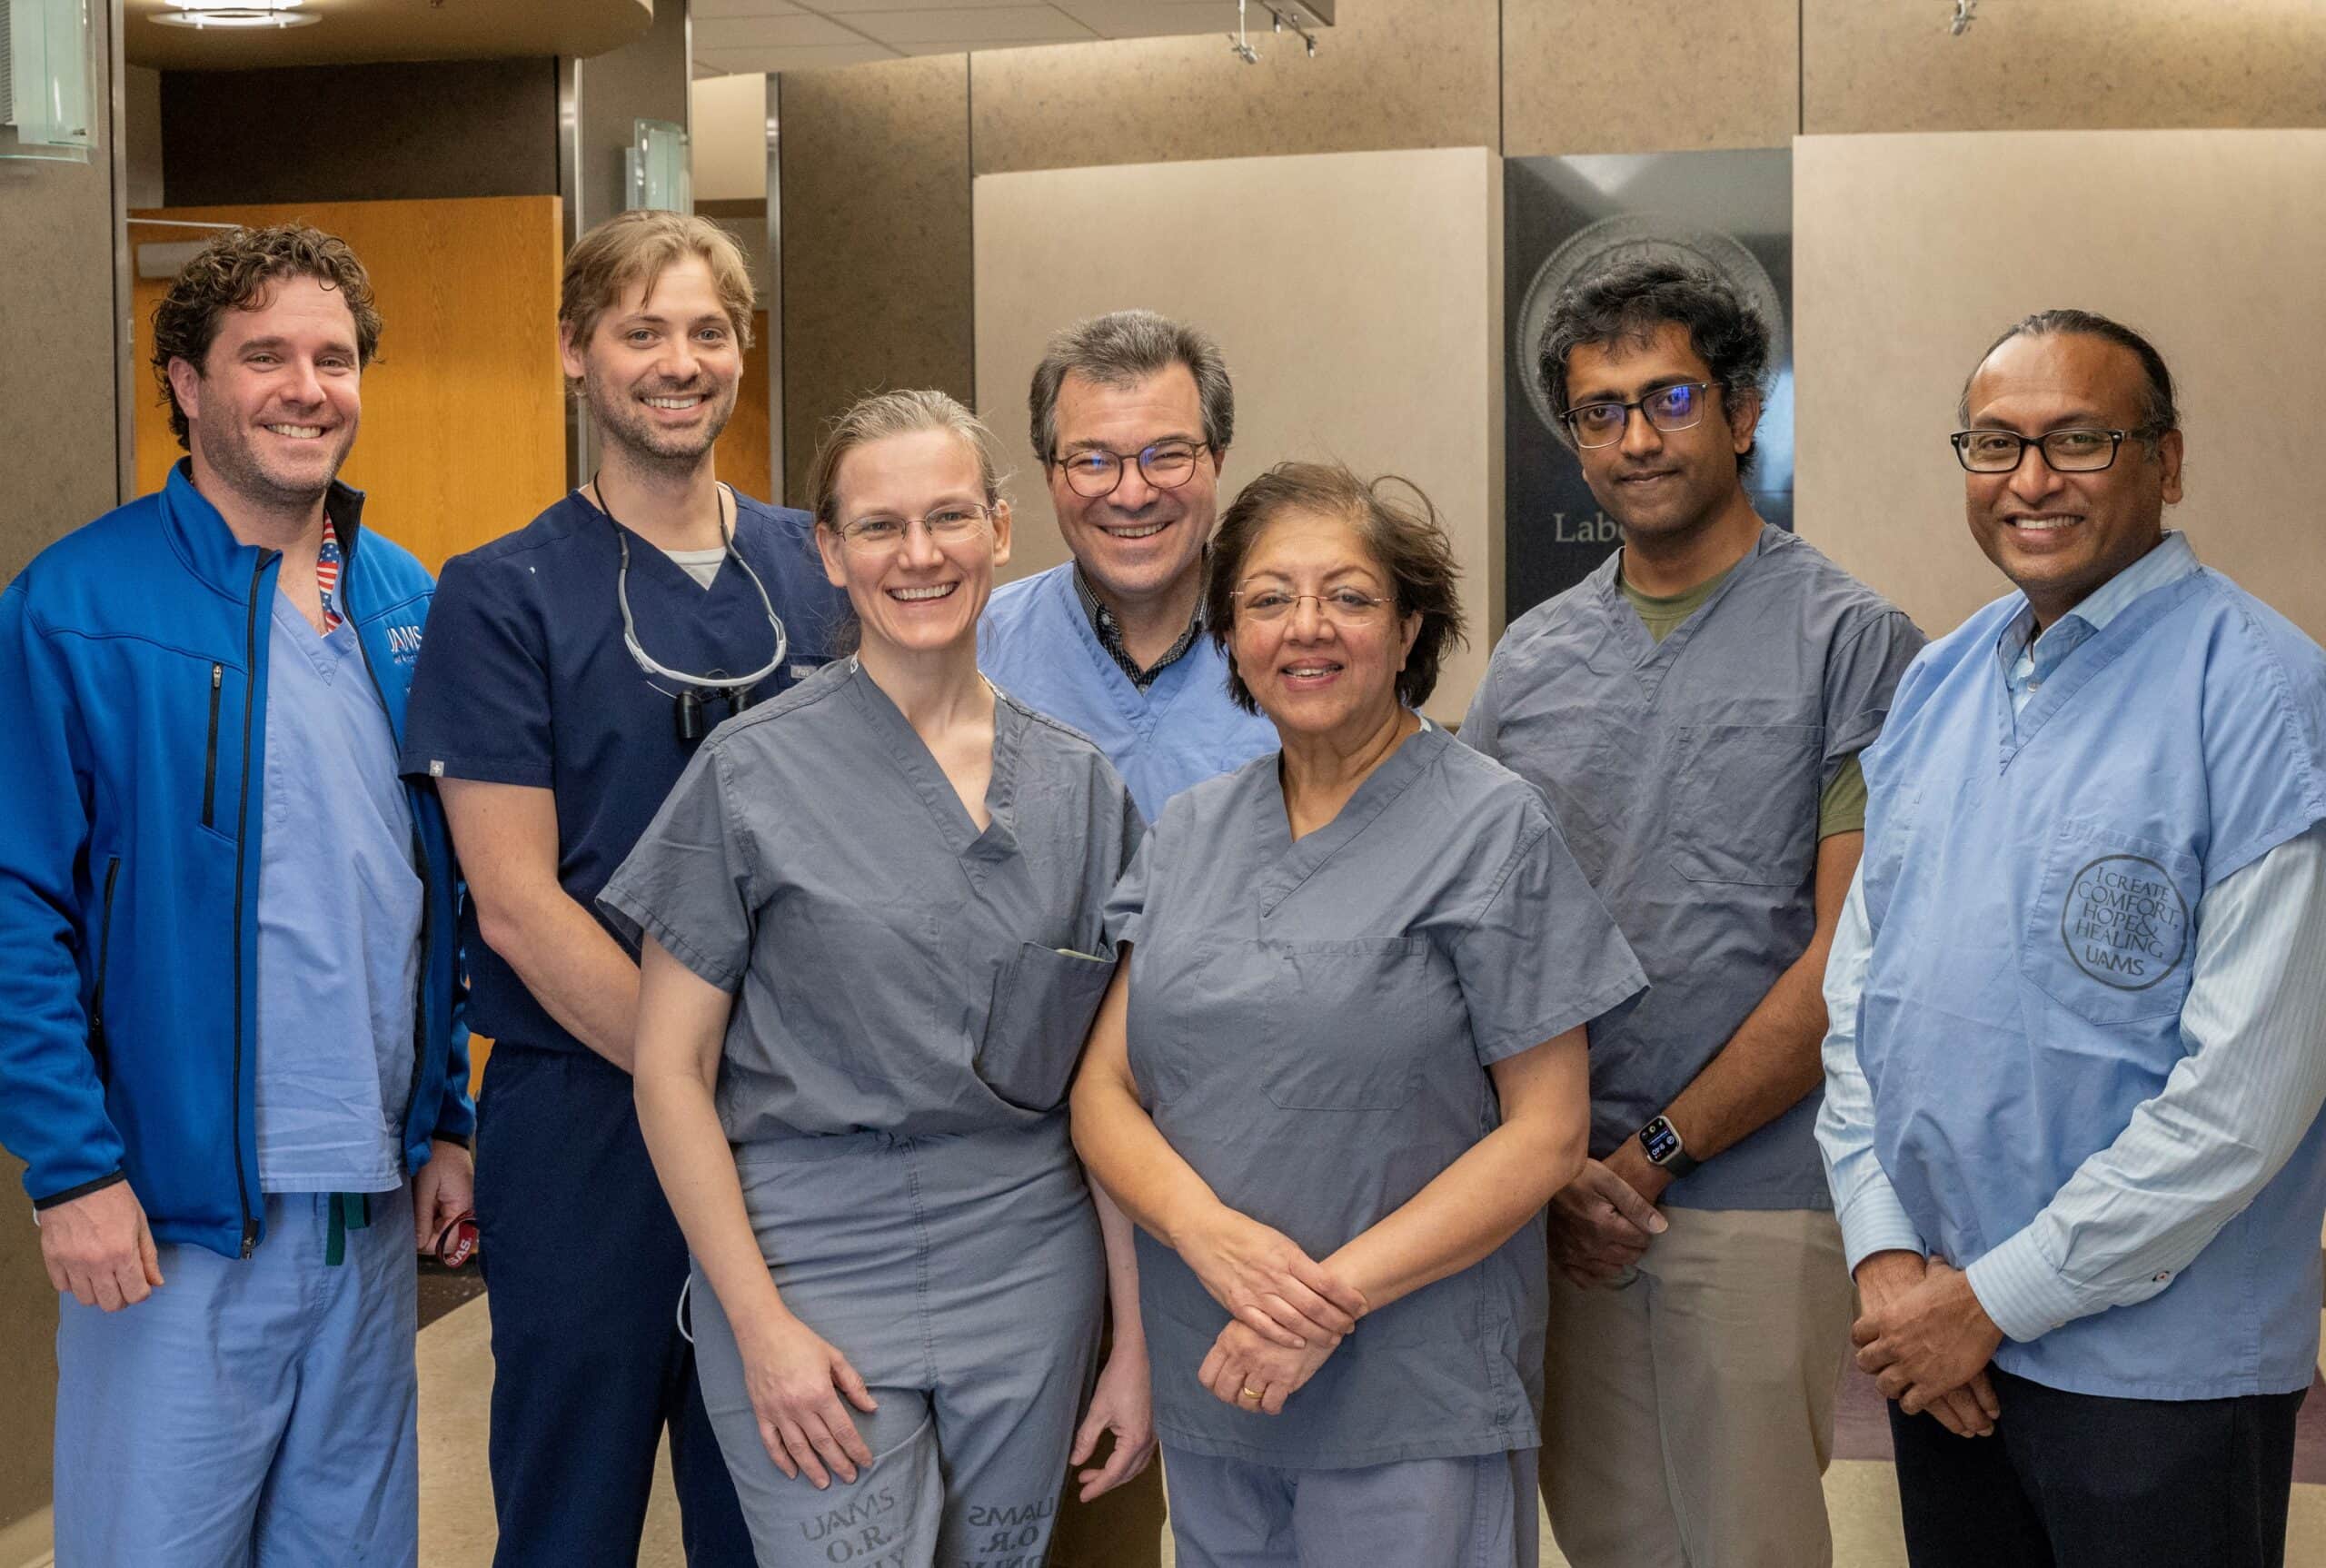 Members of the collaborating UAMS and University of Arkansas research teams for the prosthesis with the potential to provide sense of touch are (l-r) UAMS surgeons Mark Tait, M.D., John Bracey, M.D., and Erika Petersen, M.D.; and UA researchers James Abbas, Ph.D., Ranu Jung, Ph.D., Sathyakumar Kuntaegowdanahalli and Anil Thota.